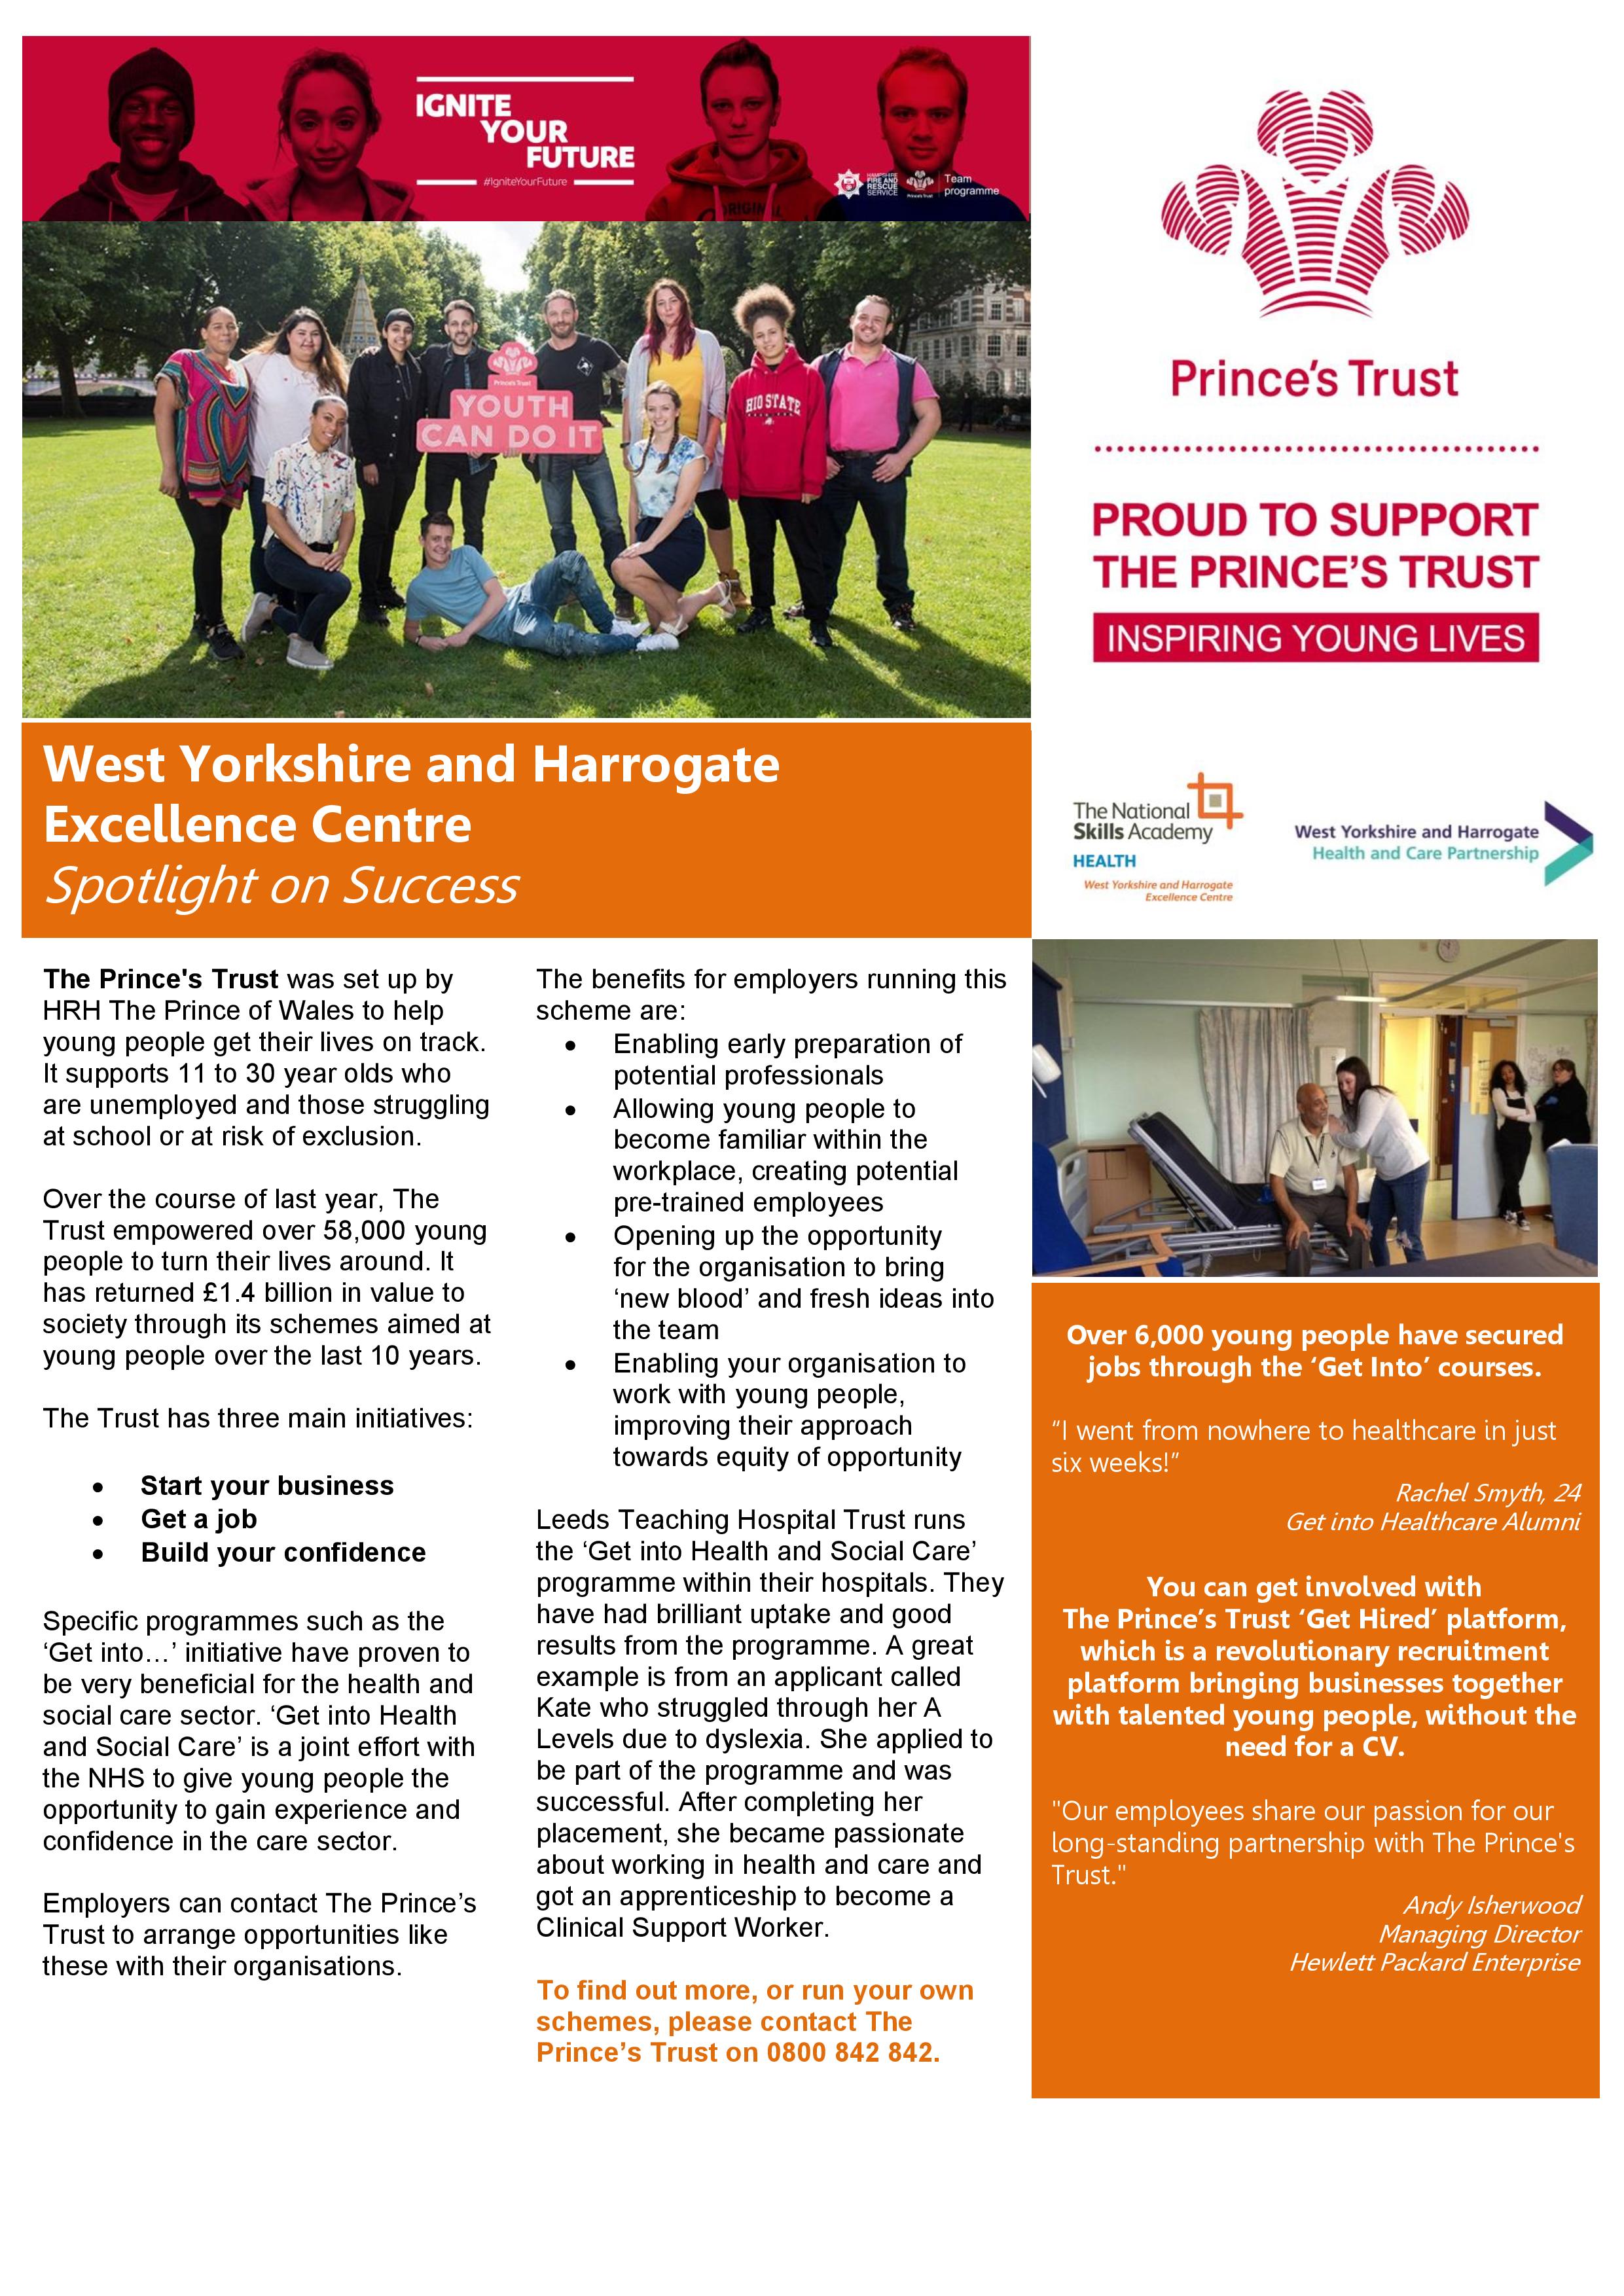 Prince s Trust Case Study Final (revised)-page-001.jpg